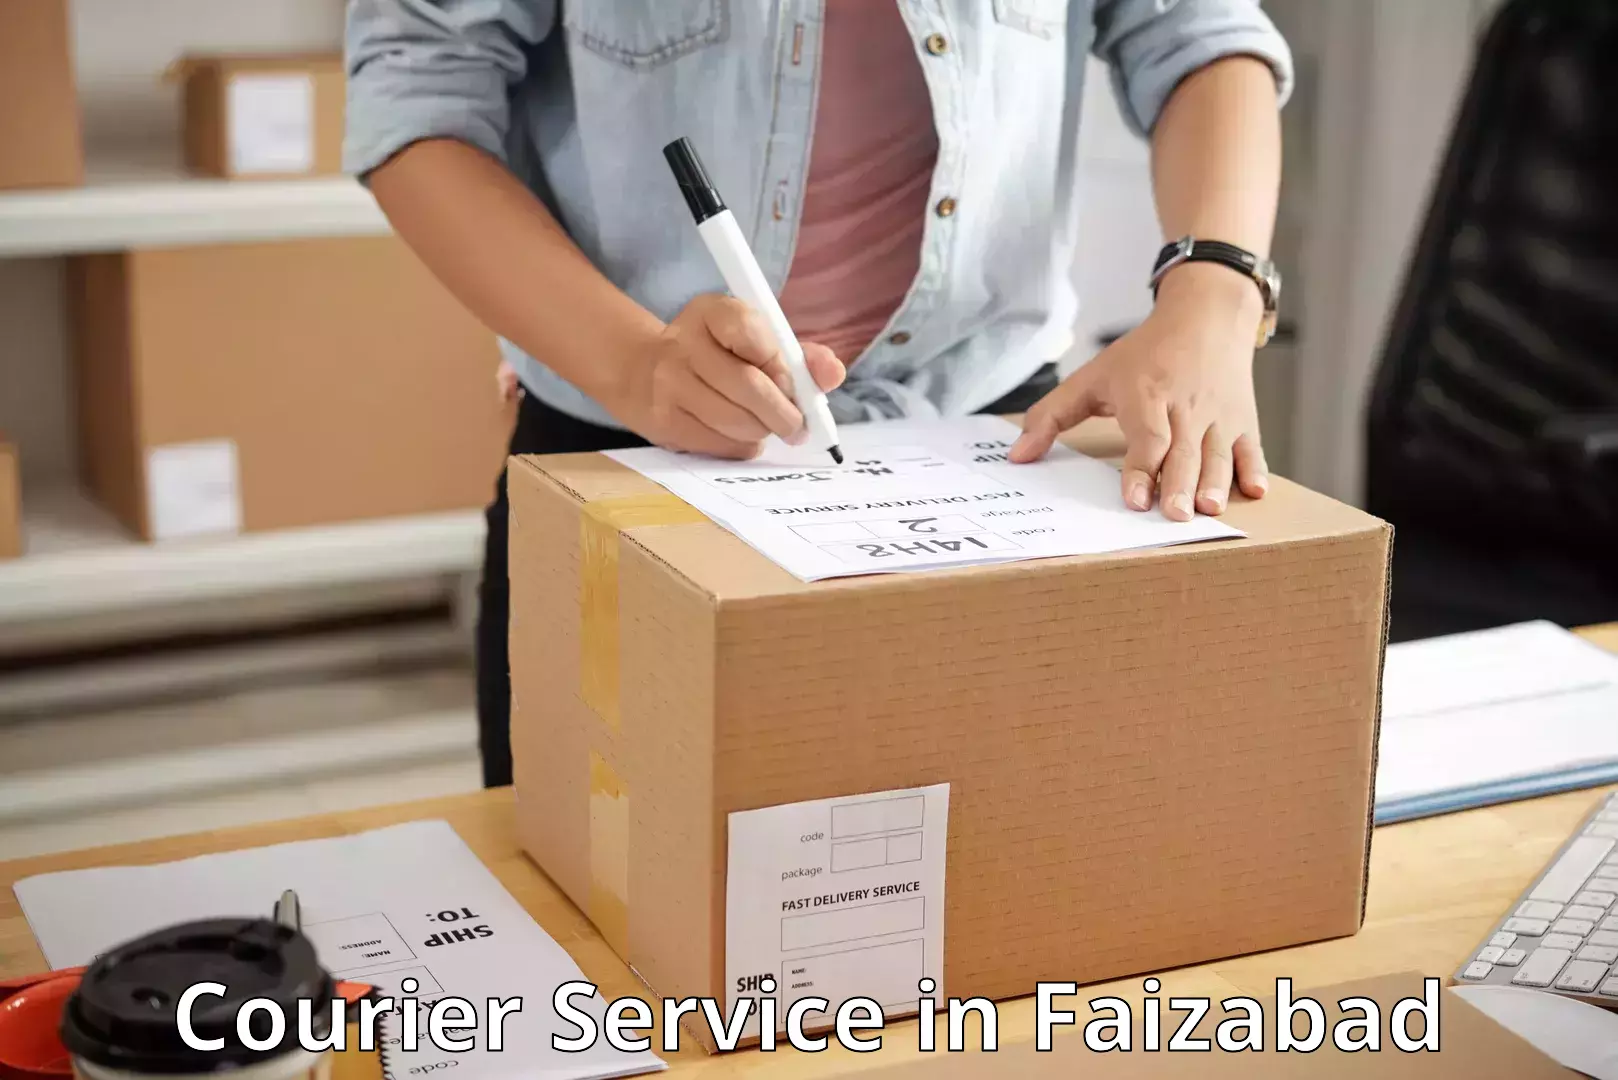 Efficient parcel tracking in Faizabad